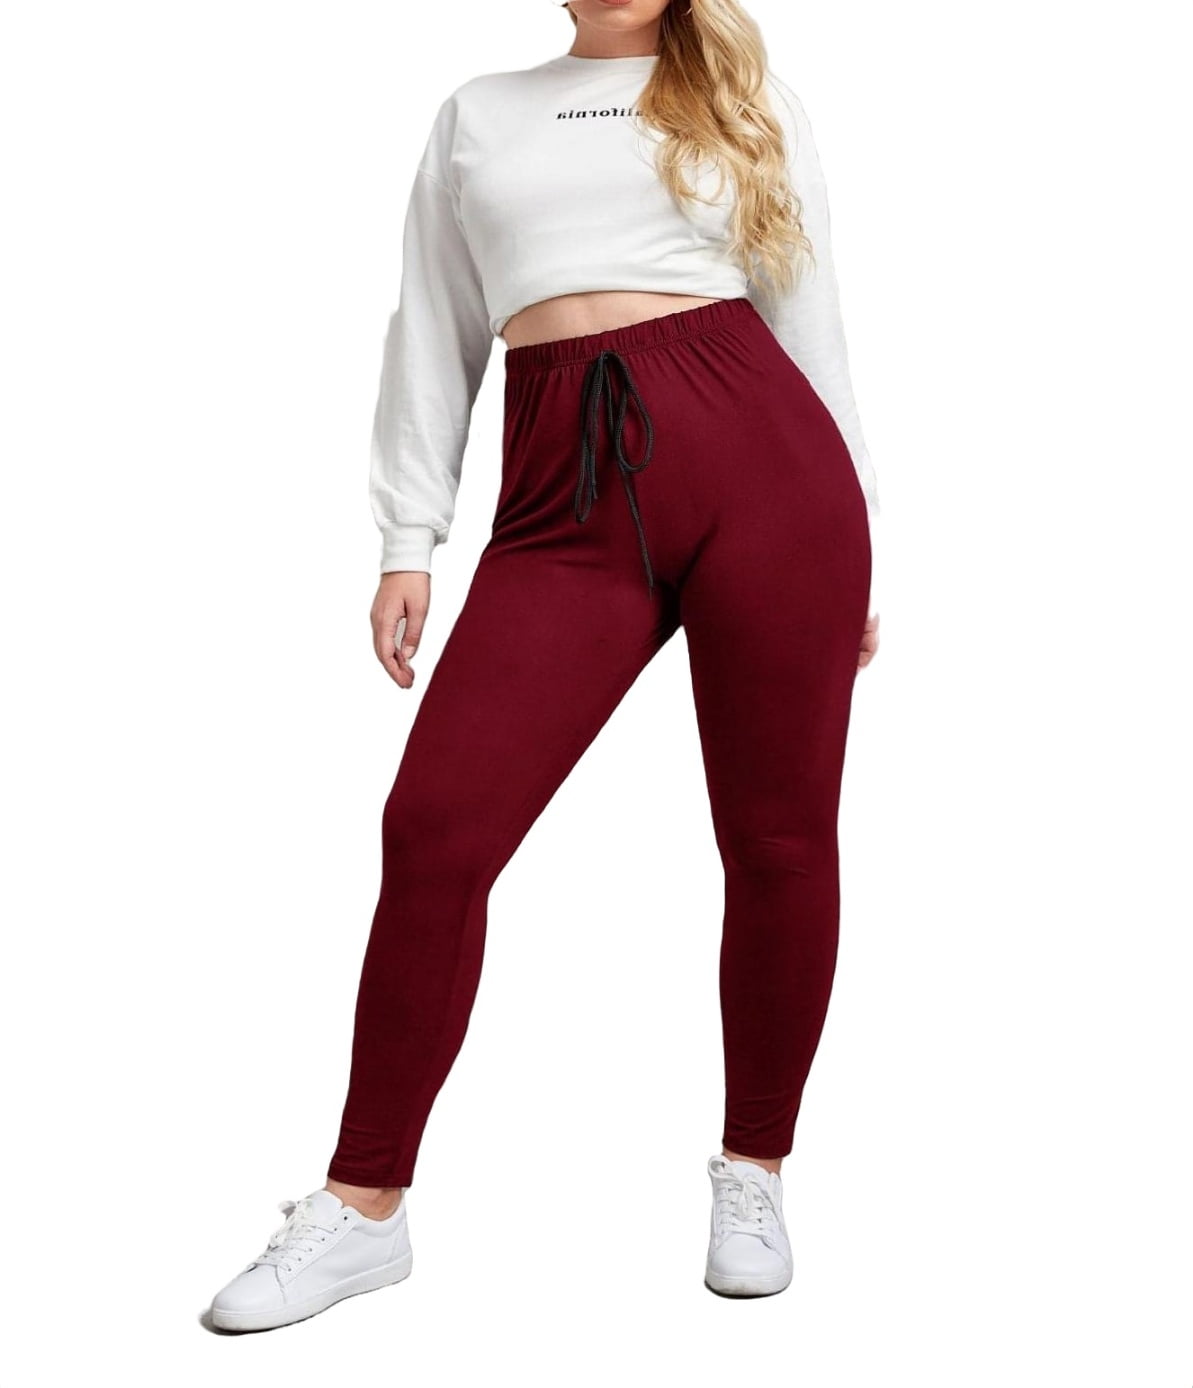 Women's Plus Size High Waist Stretchy Knot Front Solid Leggings Workout Gym  Yoga Pants 4XL(20) 